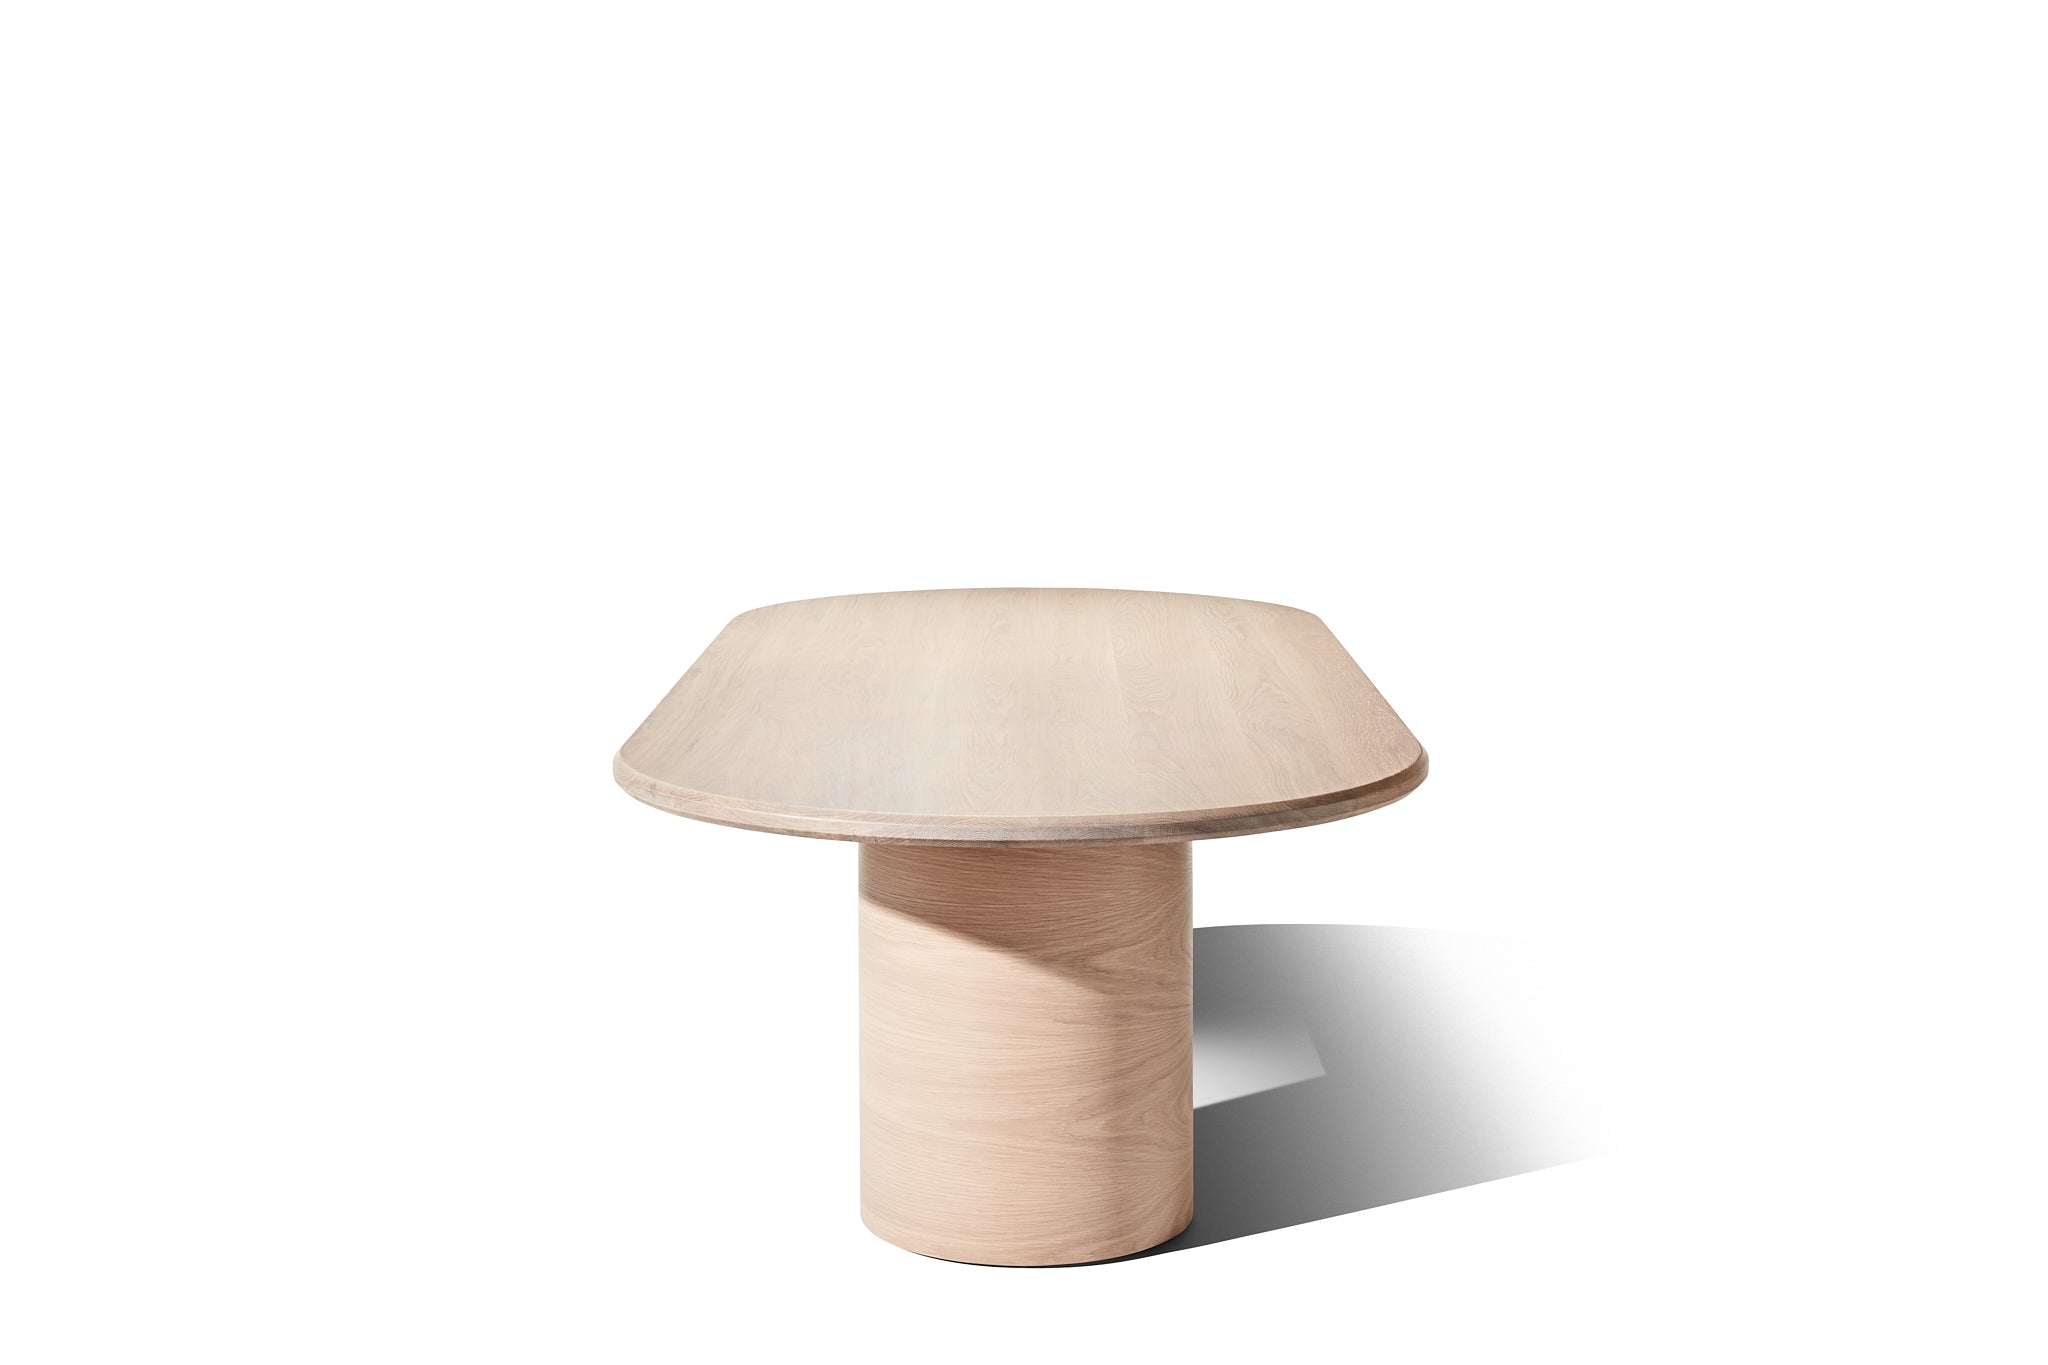 Contour Dining Table - Zuster Furniture